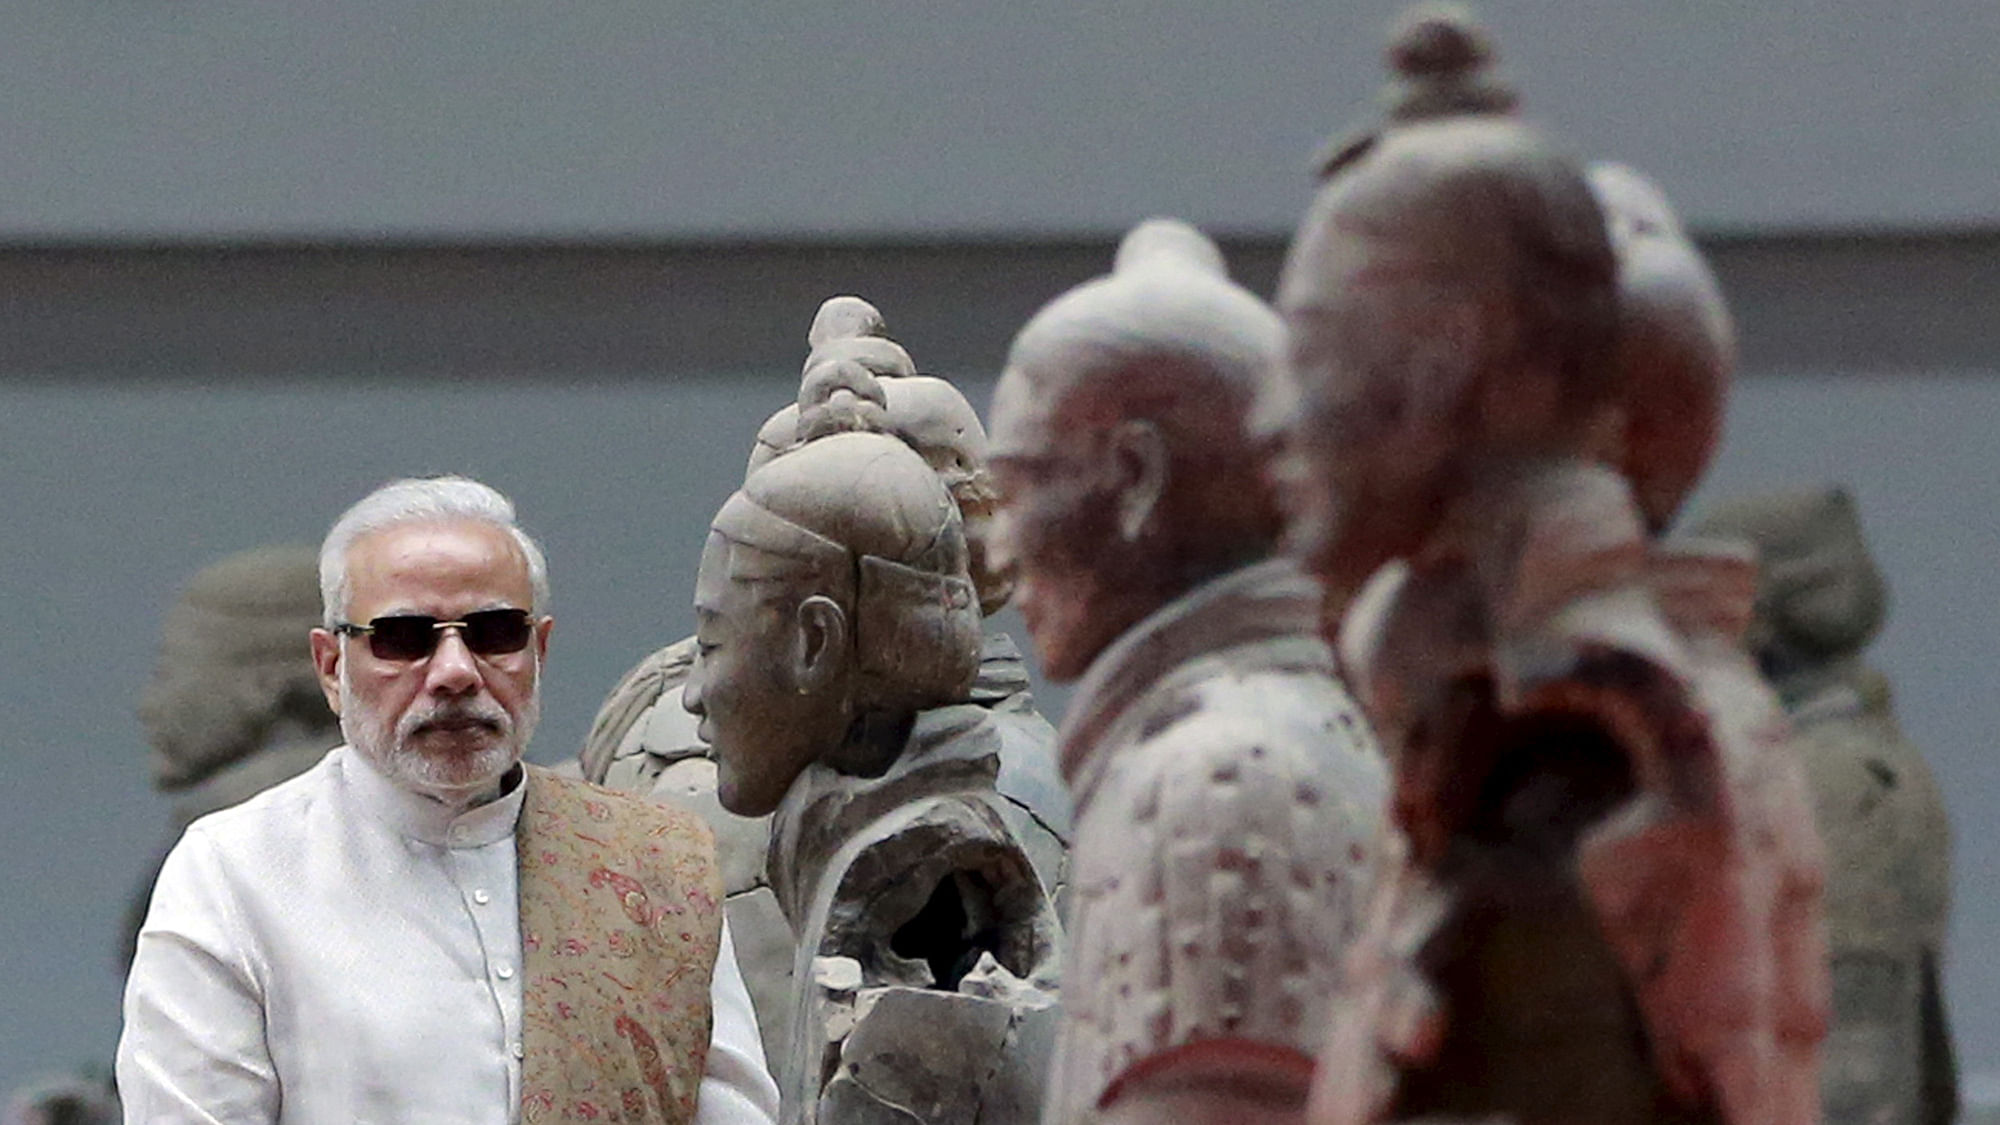 Prime Minister Narendra Modi visited the Museum of Qin Terracotta Warriors and Horses, in Xian, Shaanxi province, China on&nbsp;May 14, 2015. (Photo: Reuters)<!--EndFragment-->